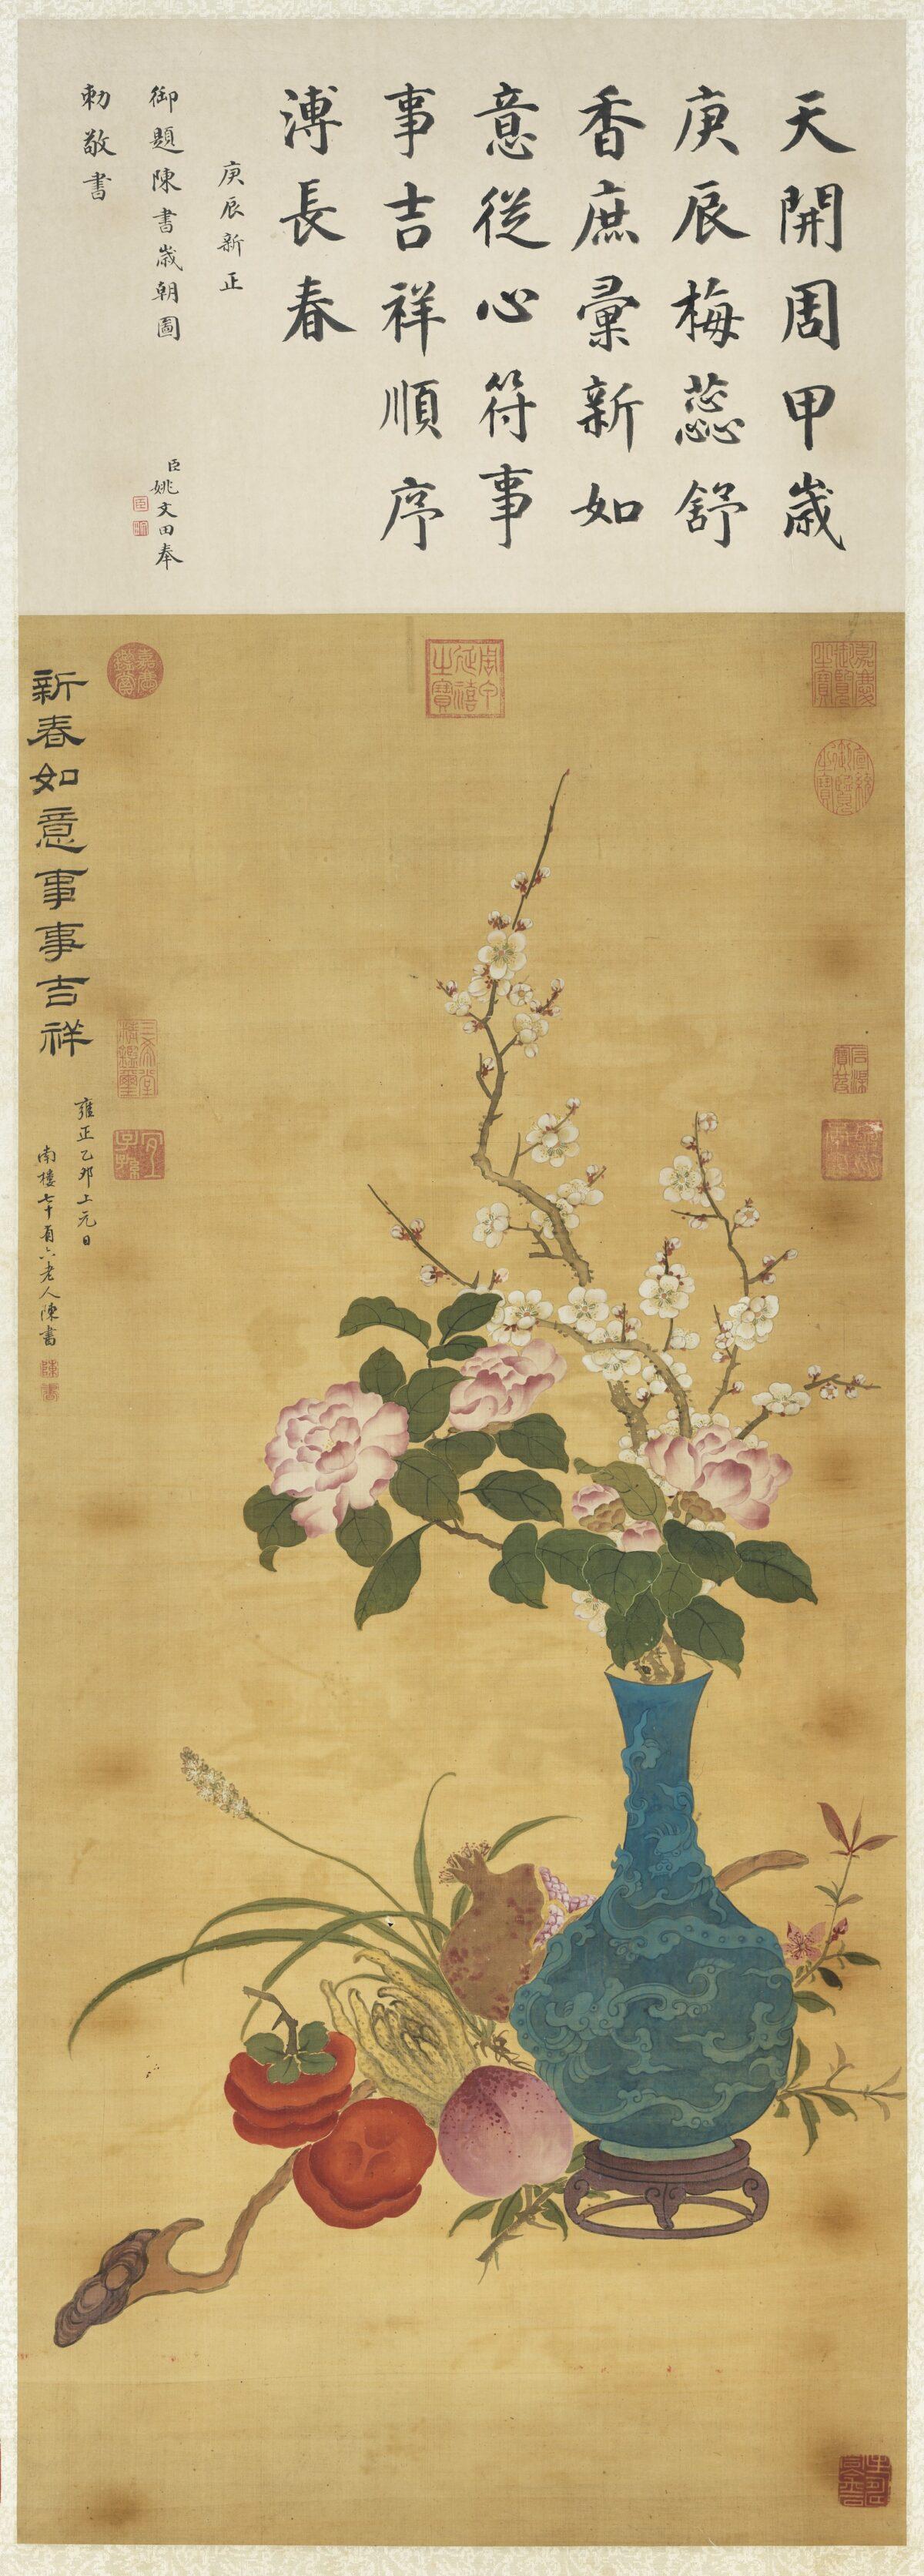 “May All Your Wishes Come True” by Chen Shu, Qing Dynasty (1644–1911). Hanging scroll. (Taipei National Palace Museum)